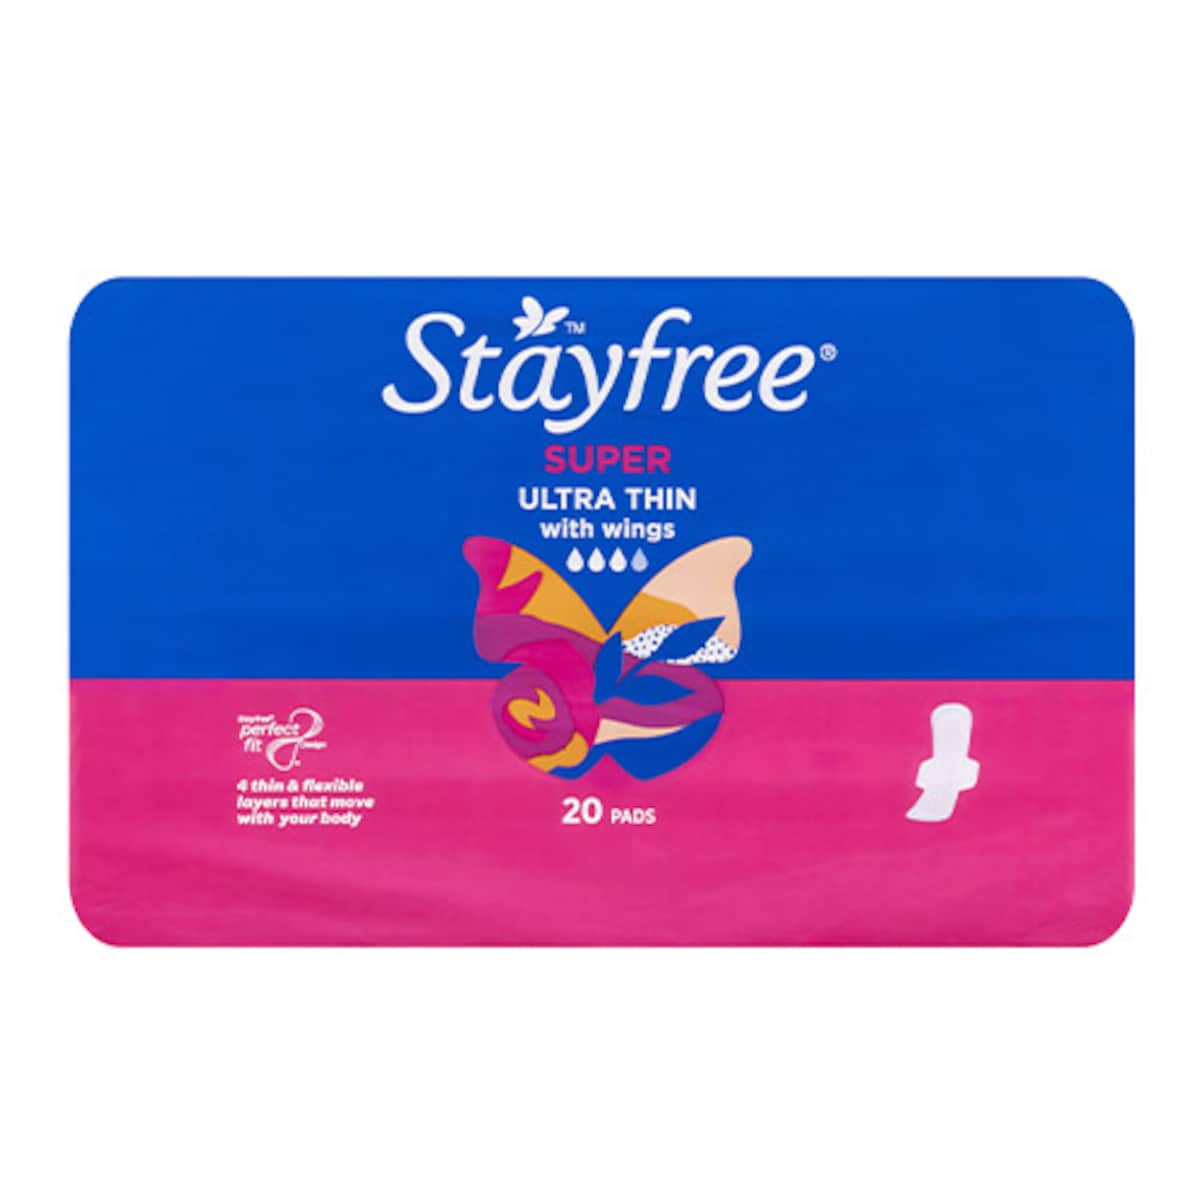 Stayfree Ultra Thin Super with Wings 20 Pack